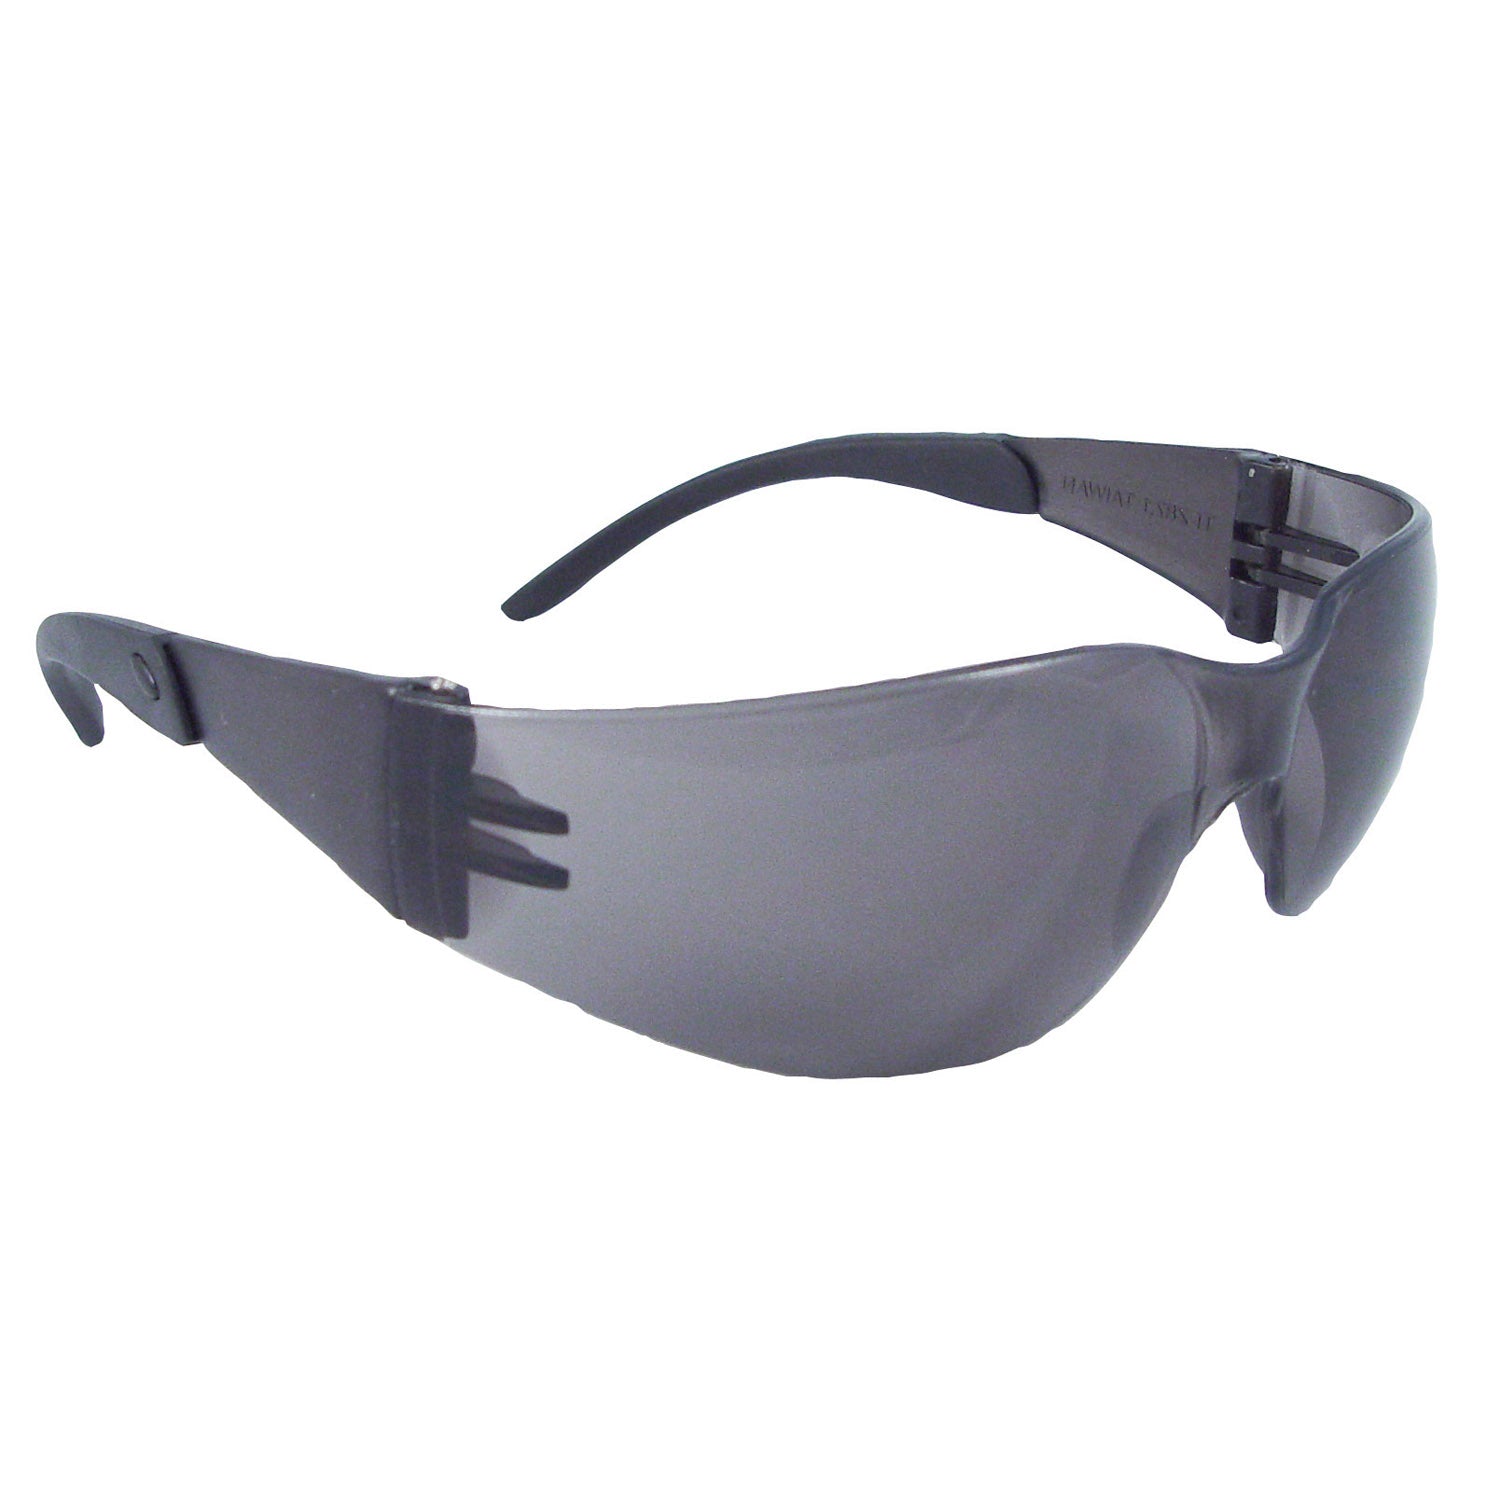 Mirage RT Safety Glasses (Box of 12)